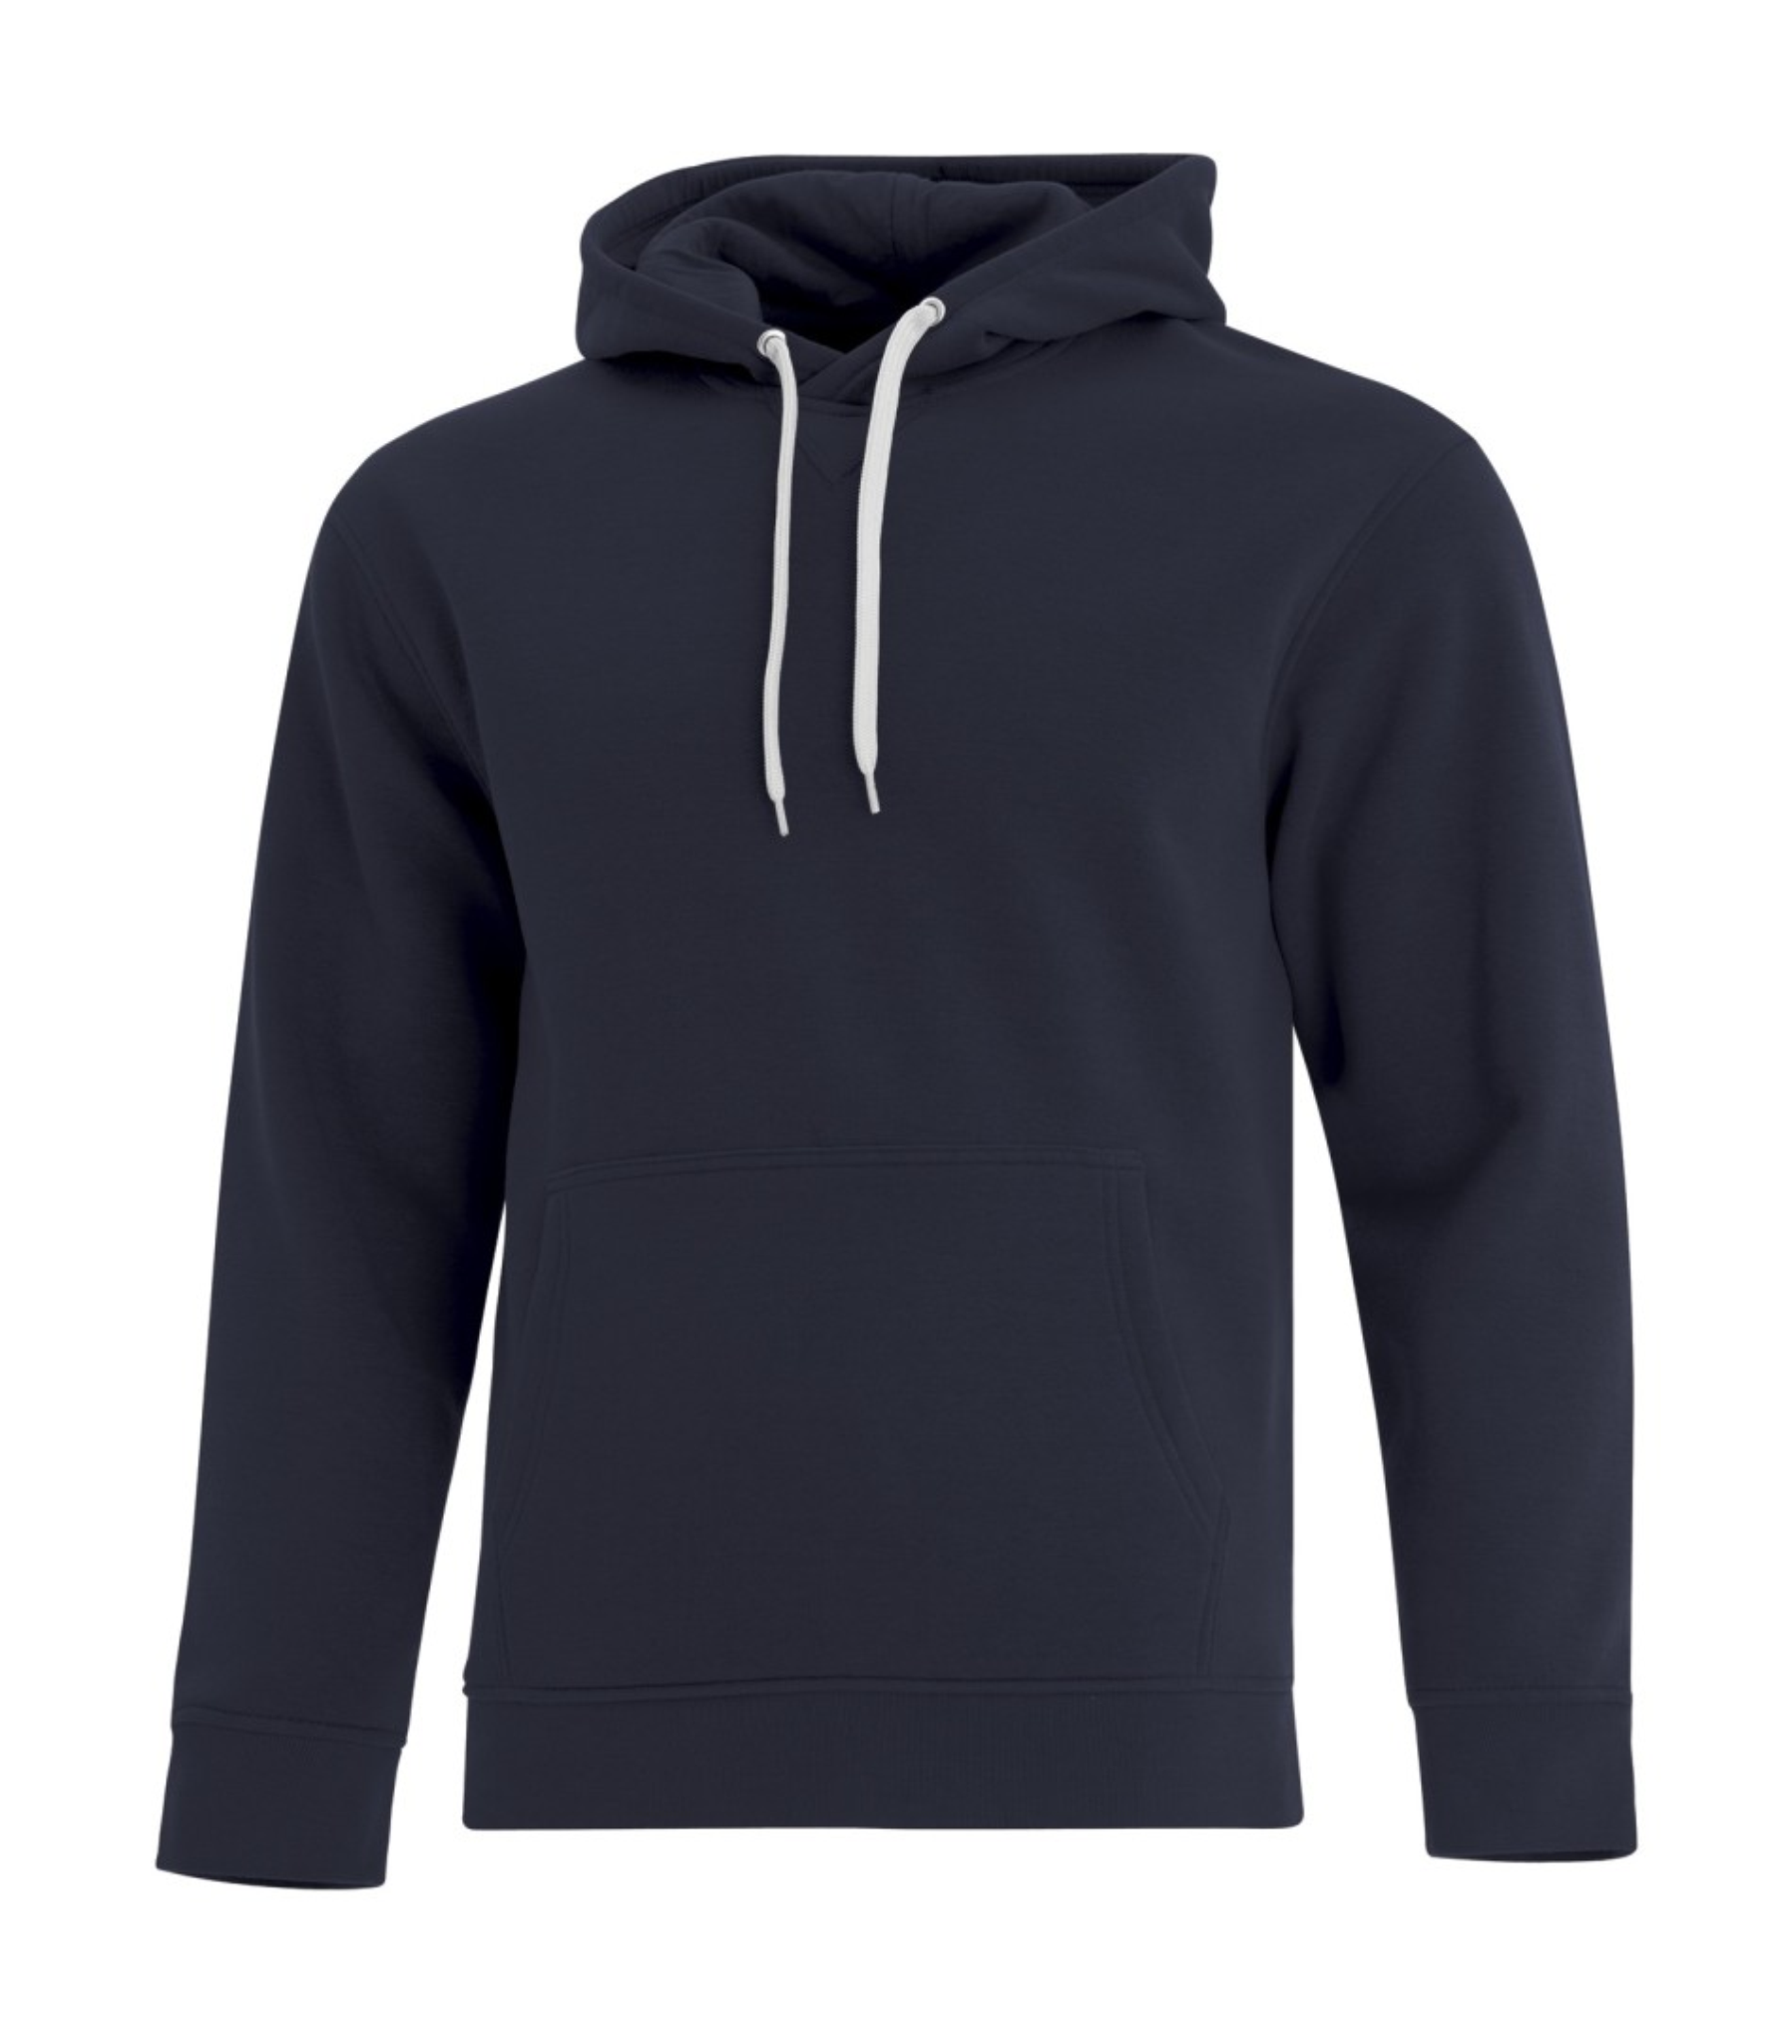 Adult Hoodie - True Navy Cotton/Polyester - ATC F2016